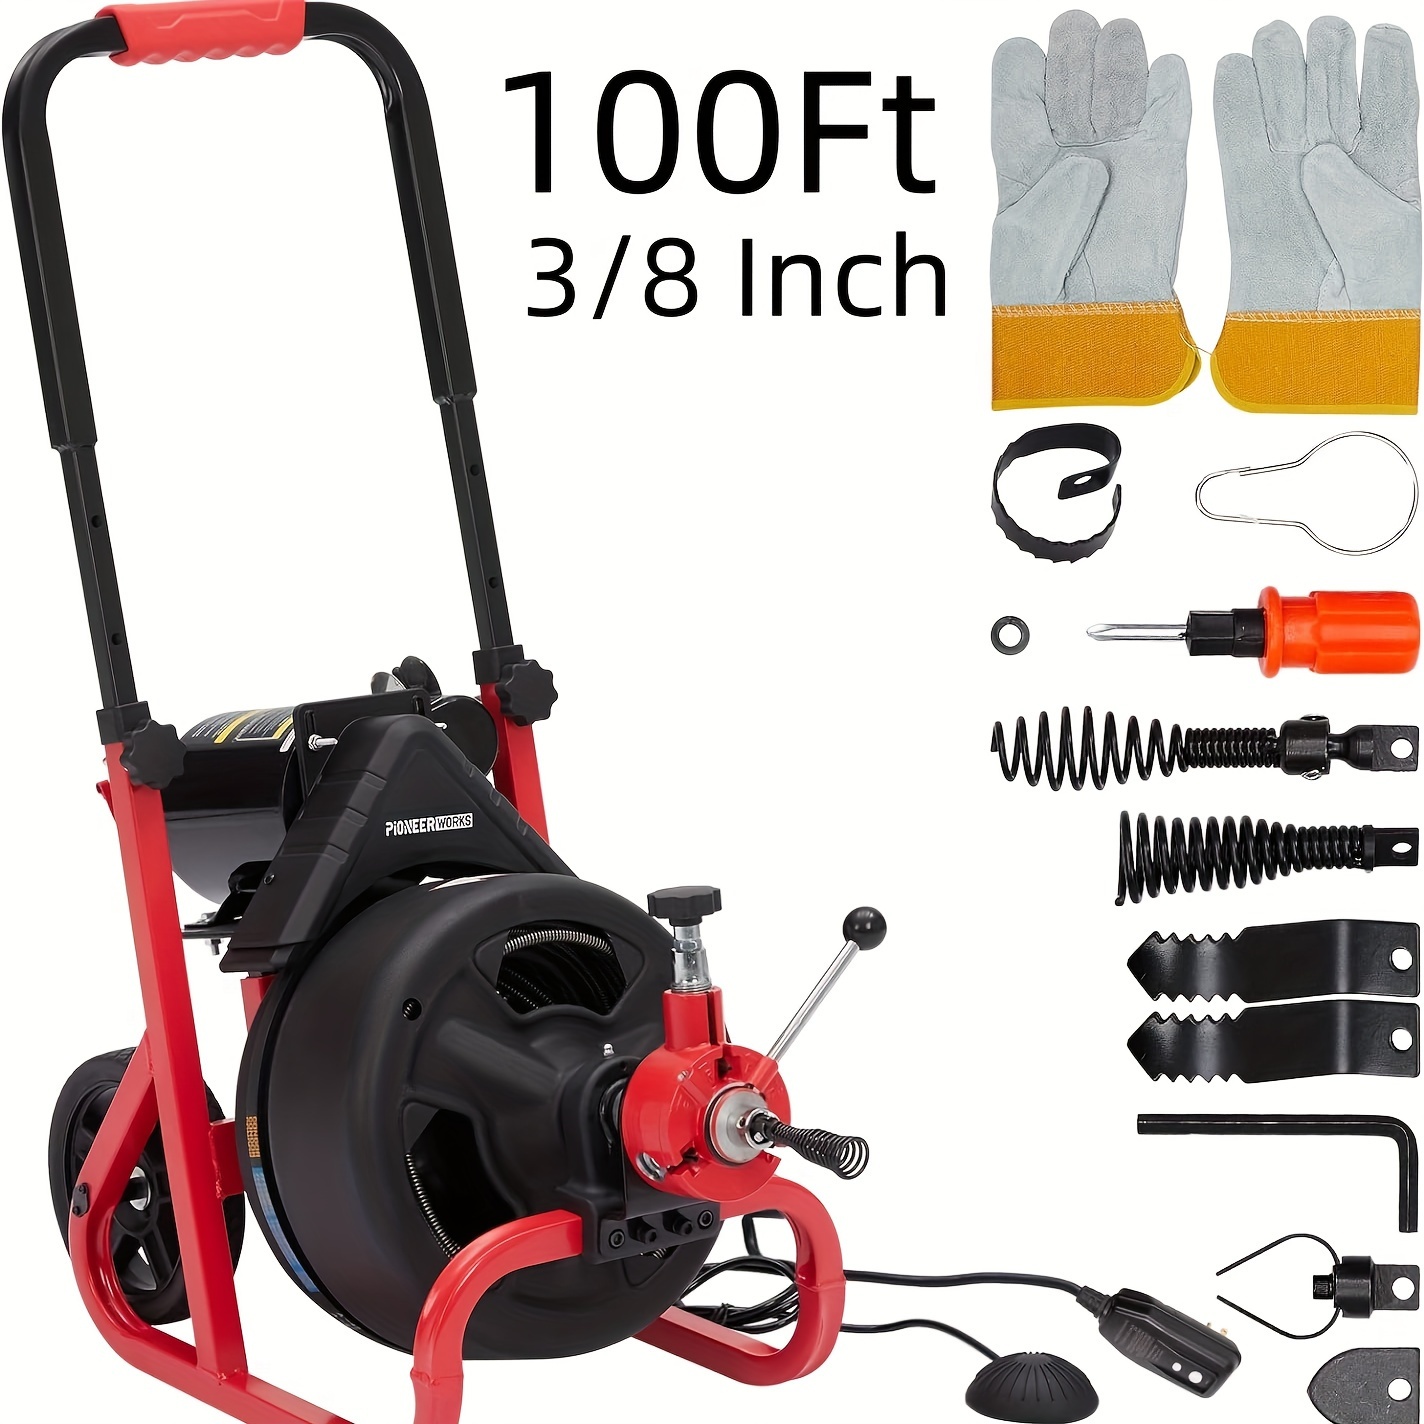 

100ft X 3/8in Portable Drain Cleaner Machine, Heavy Duty Sewer Snake Machine Auto Feed, Drain Auger Cleaner With 6 Cutters, Air-activated Foot Switch